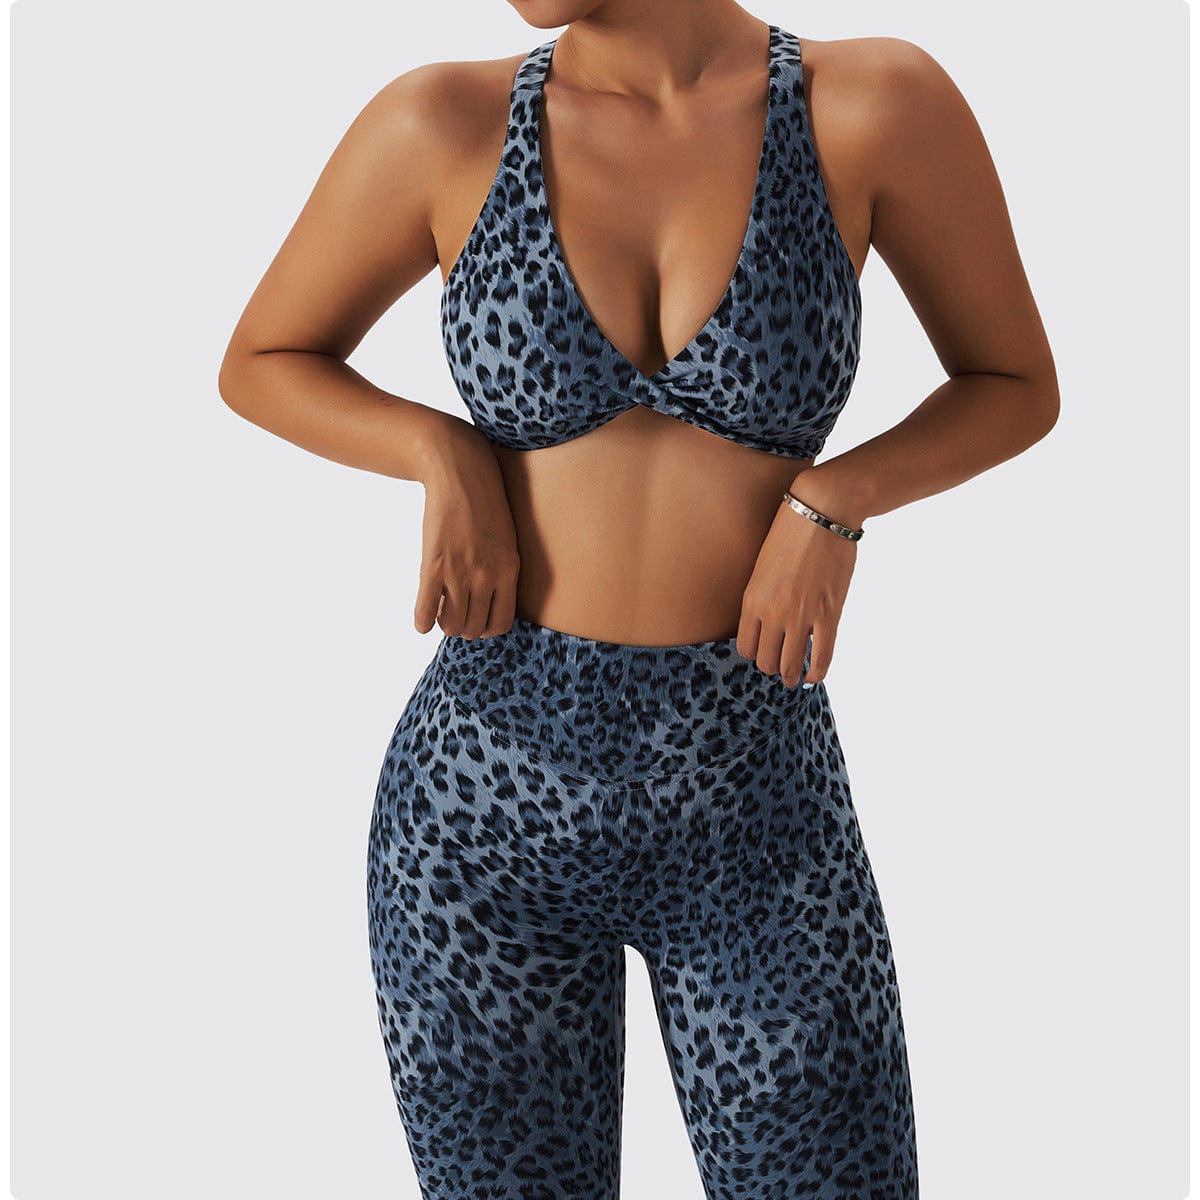  VOYLE Women Two-Piece Outfits Sexy Leopard Print Sports Bra and  Legging Set for Active Wear,Brown,XL : Clothing, Shoes & Jewelry